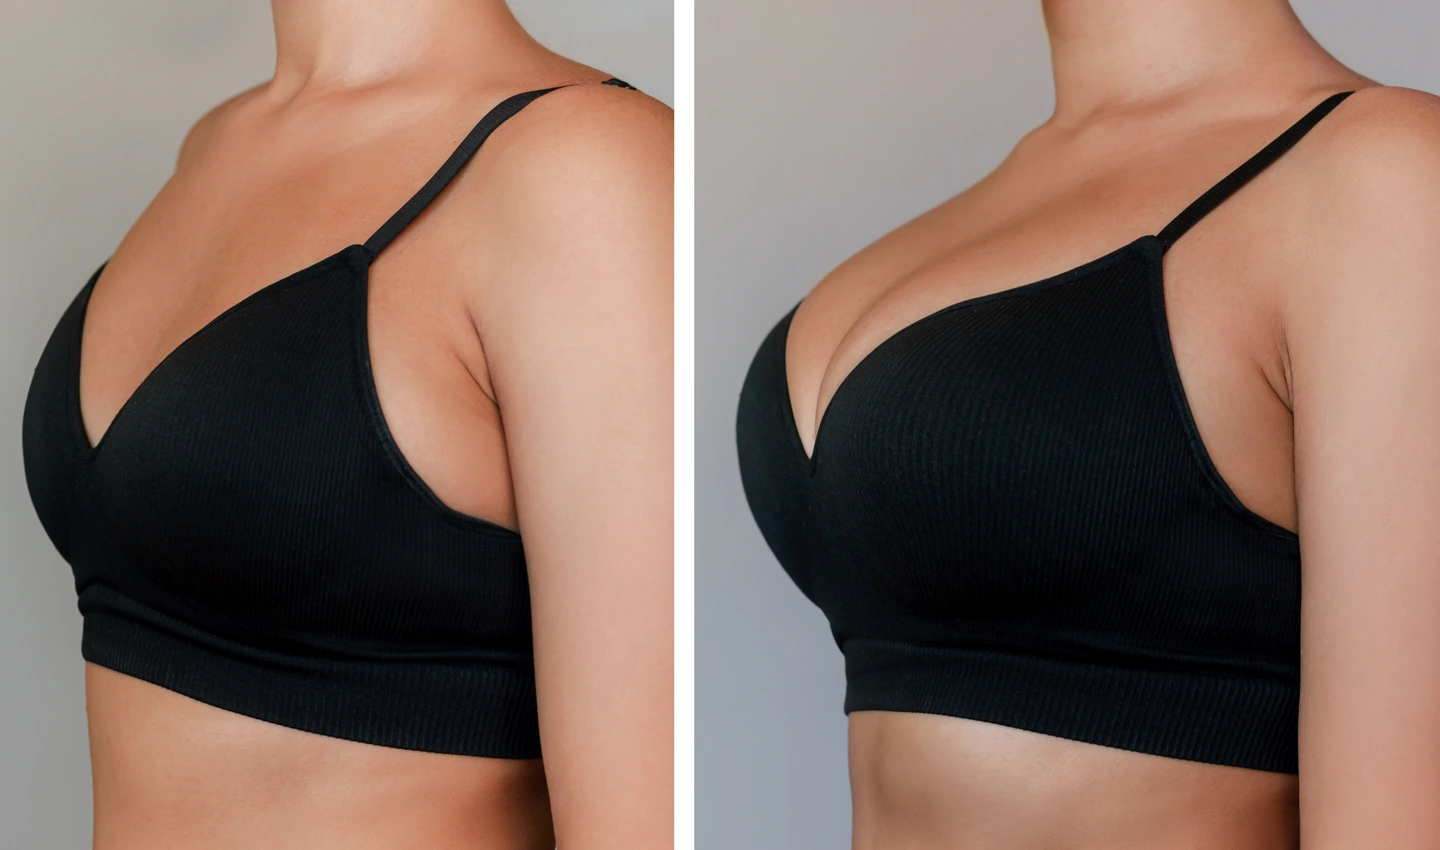 Real Results Breast Augmentation - Before and After Photos of Actual Patient